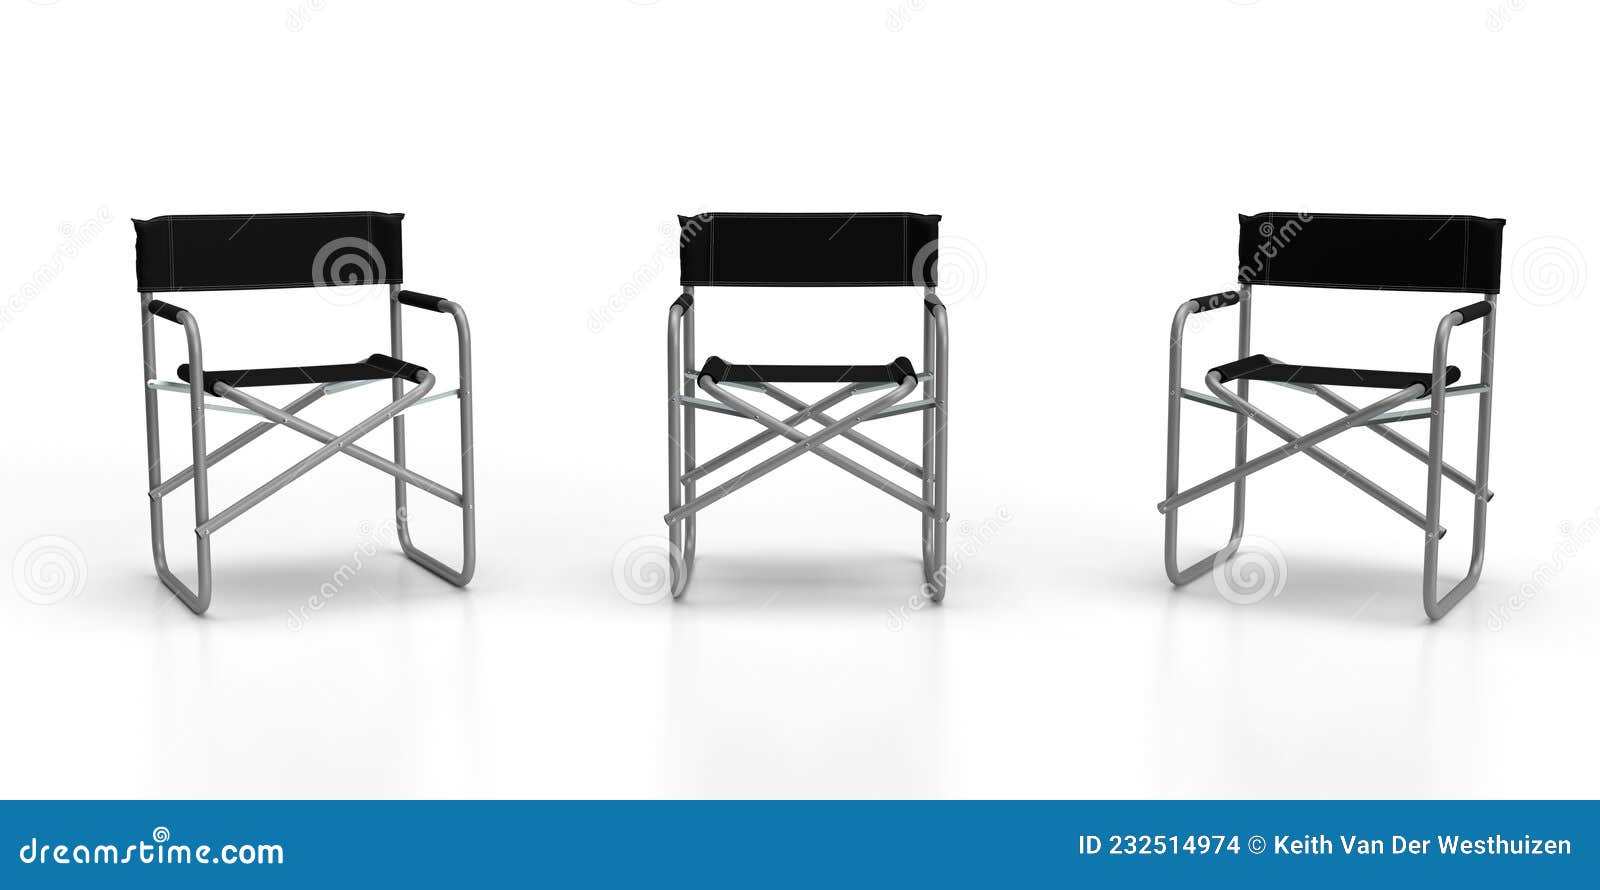 Directors Chairs D Render Three Aluminum Constructed Folding Black Seat Material Back Rests Stitch Lines Isolated 232514974 